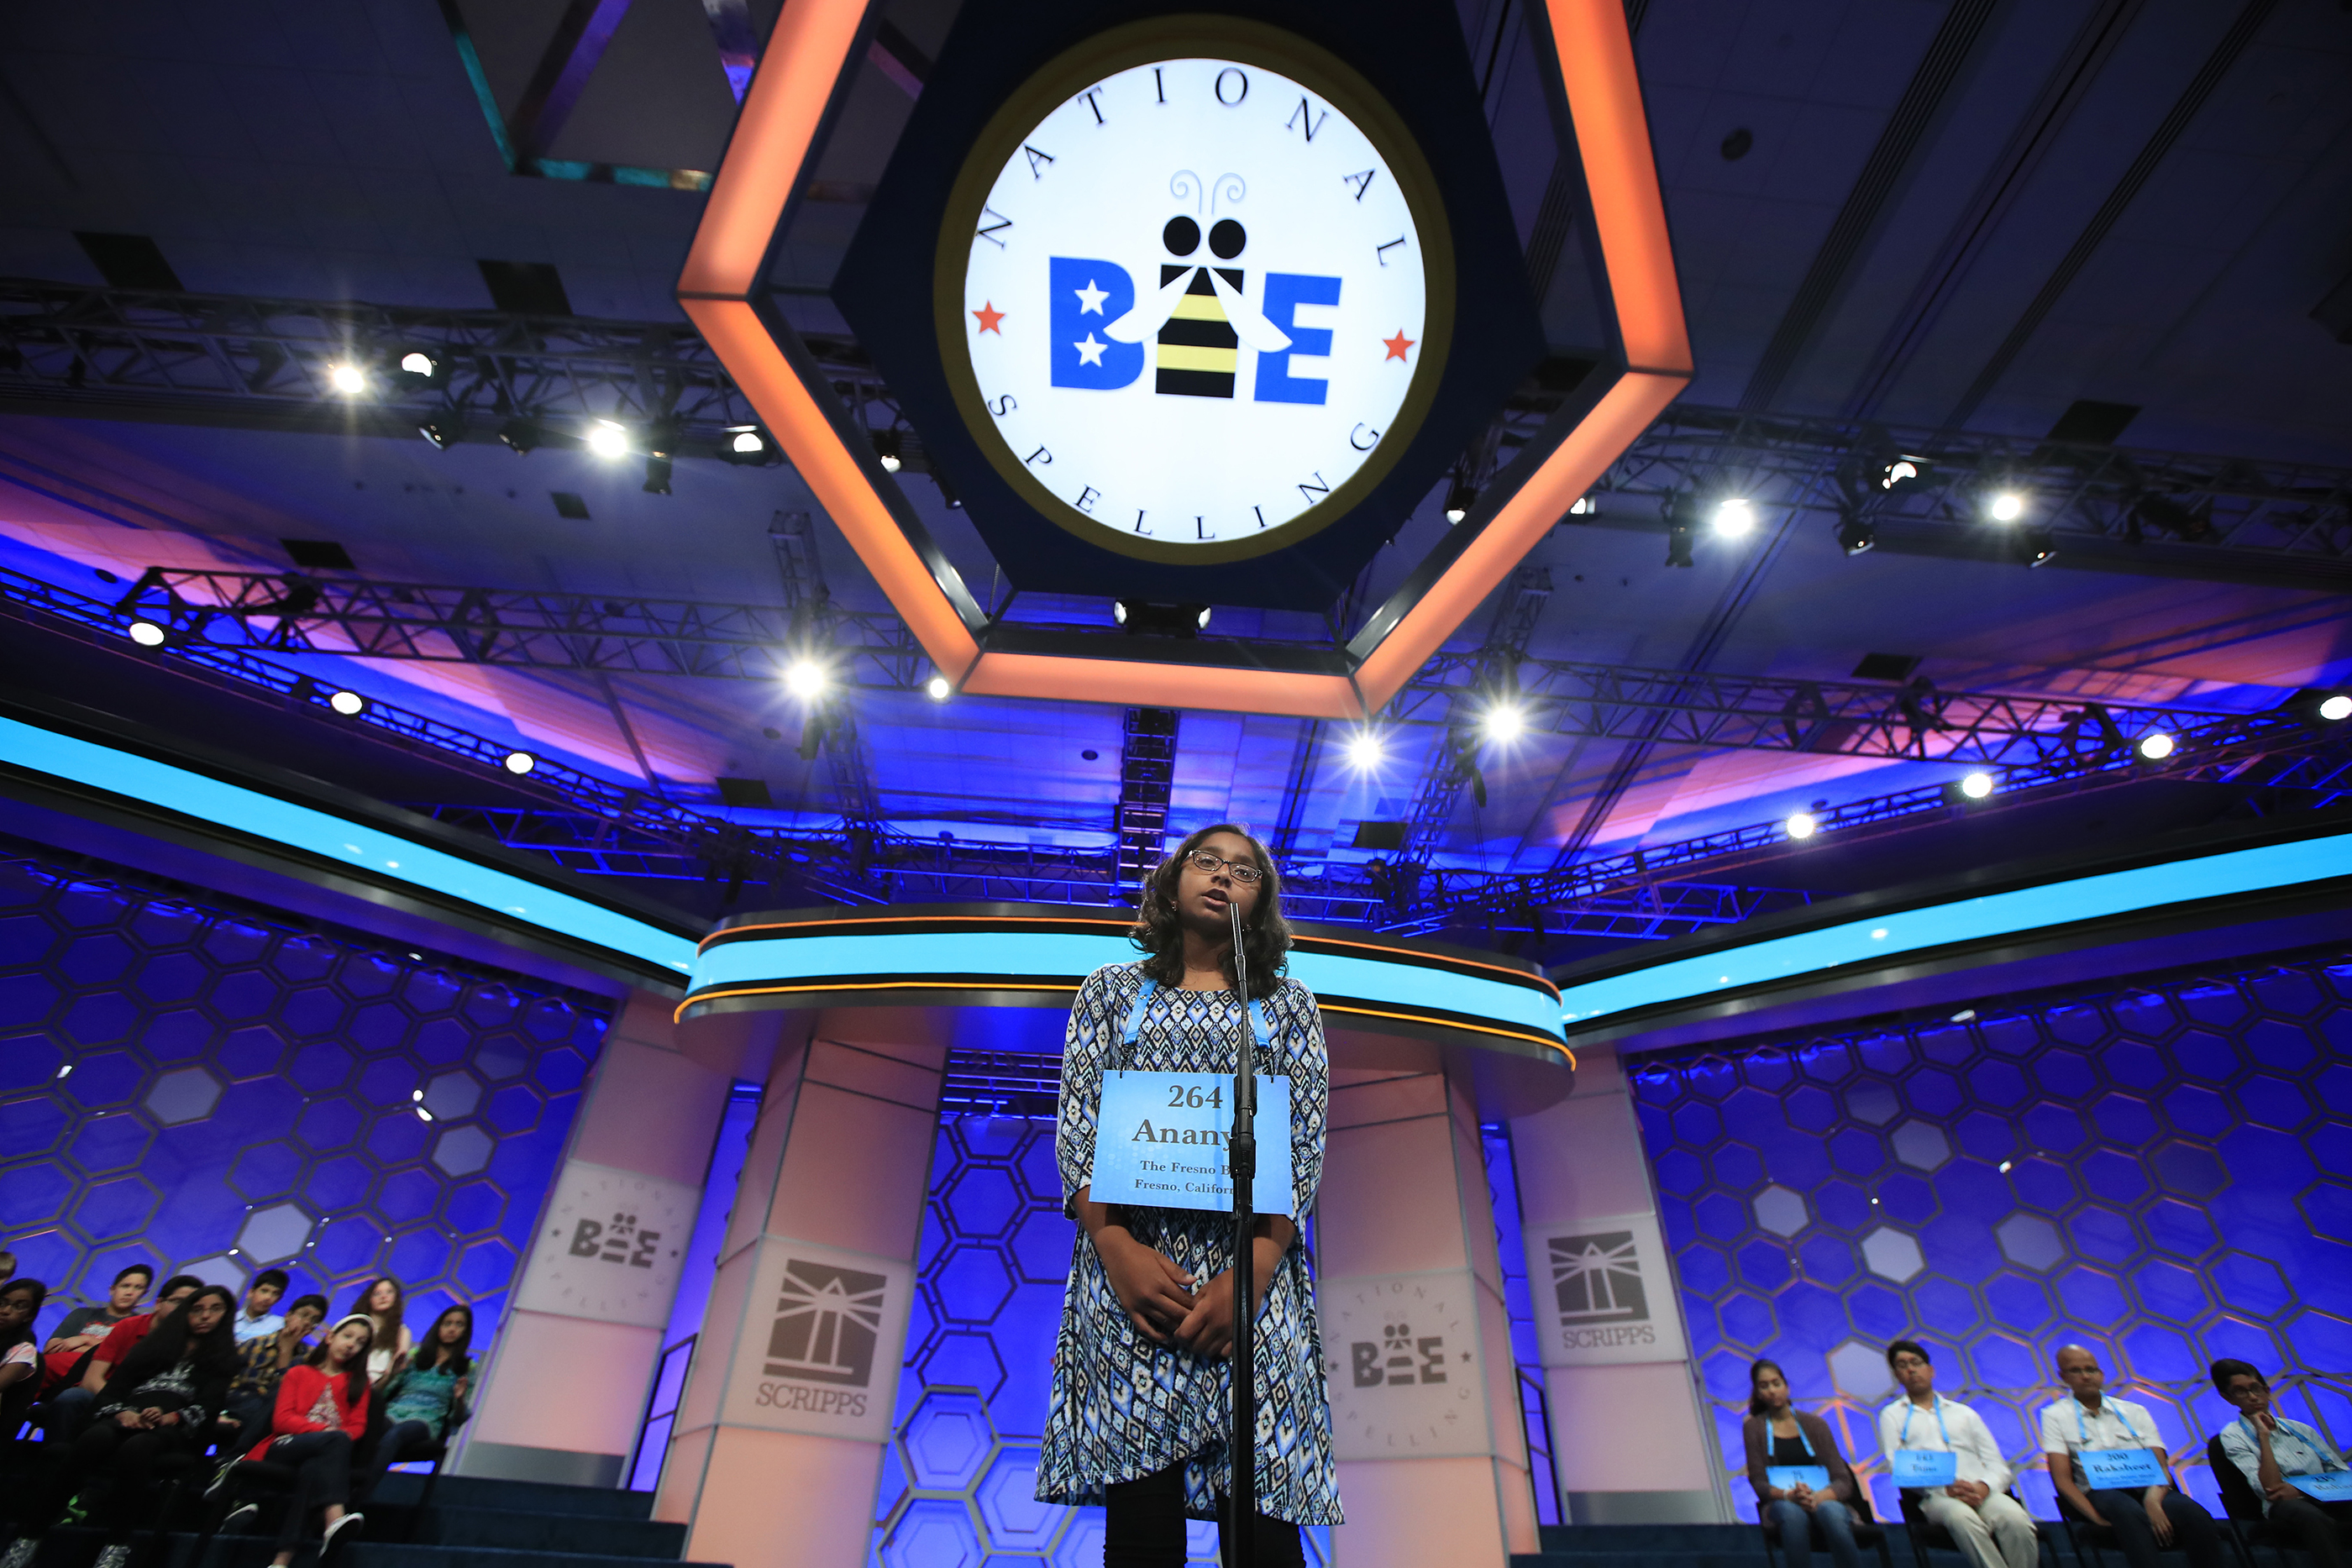 National Spelling Bee How Much It Costs Money